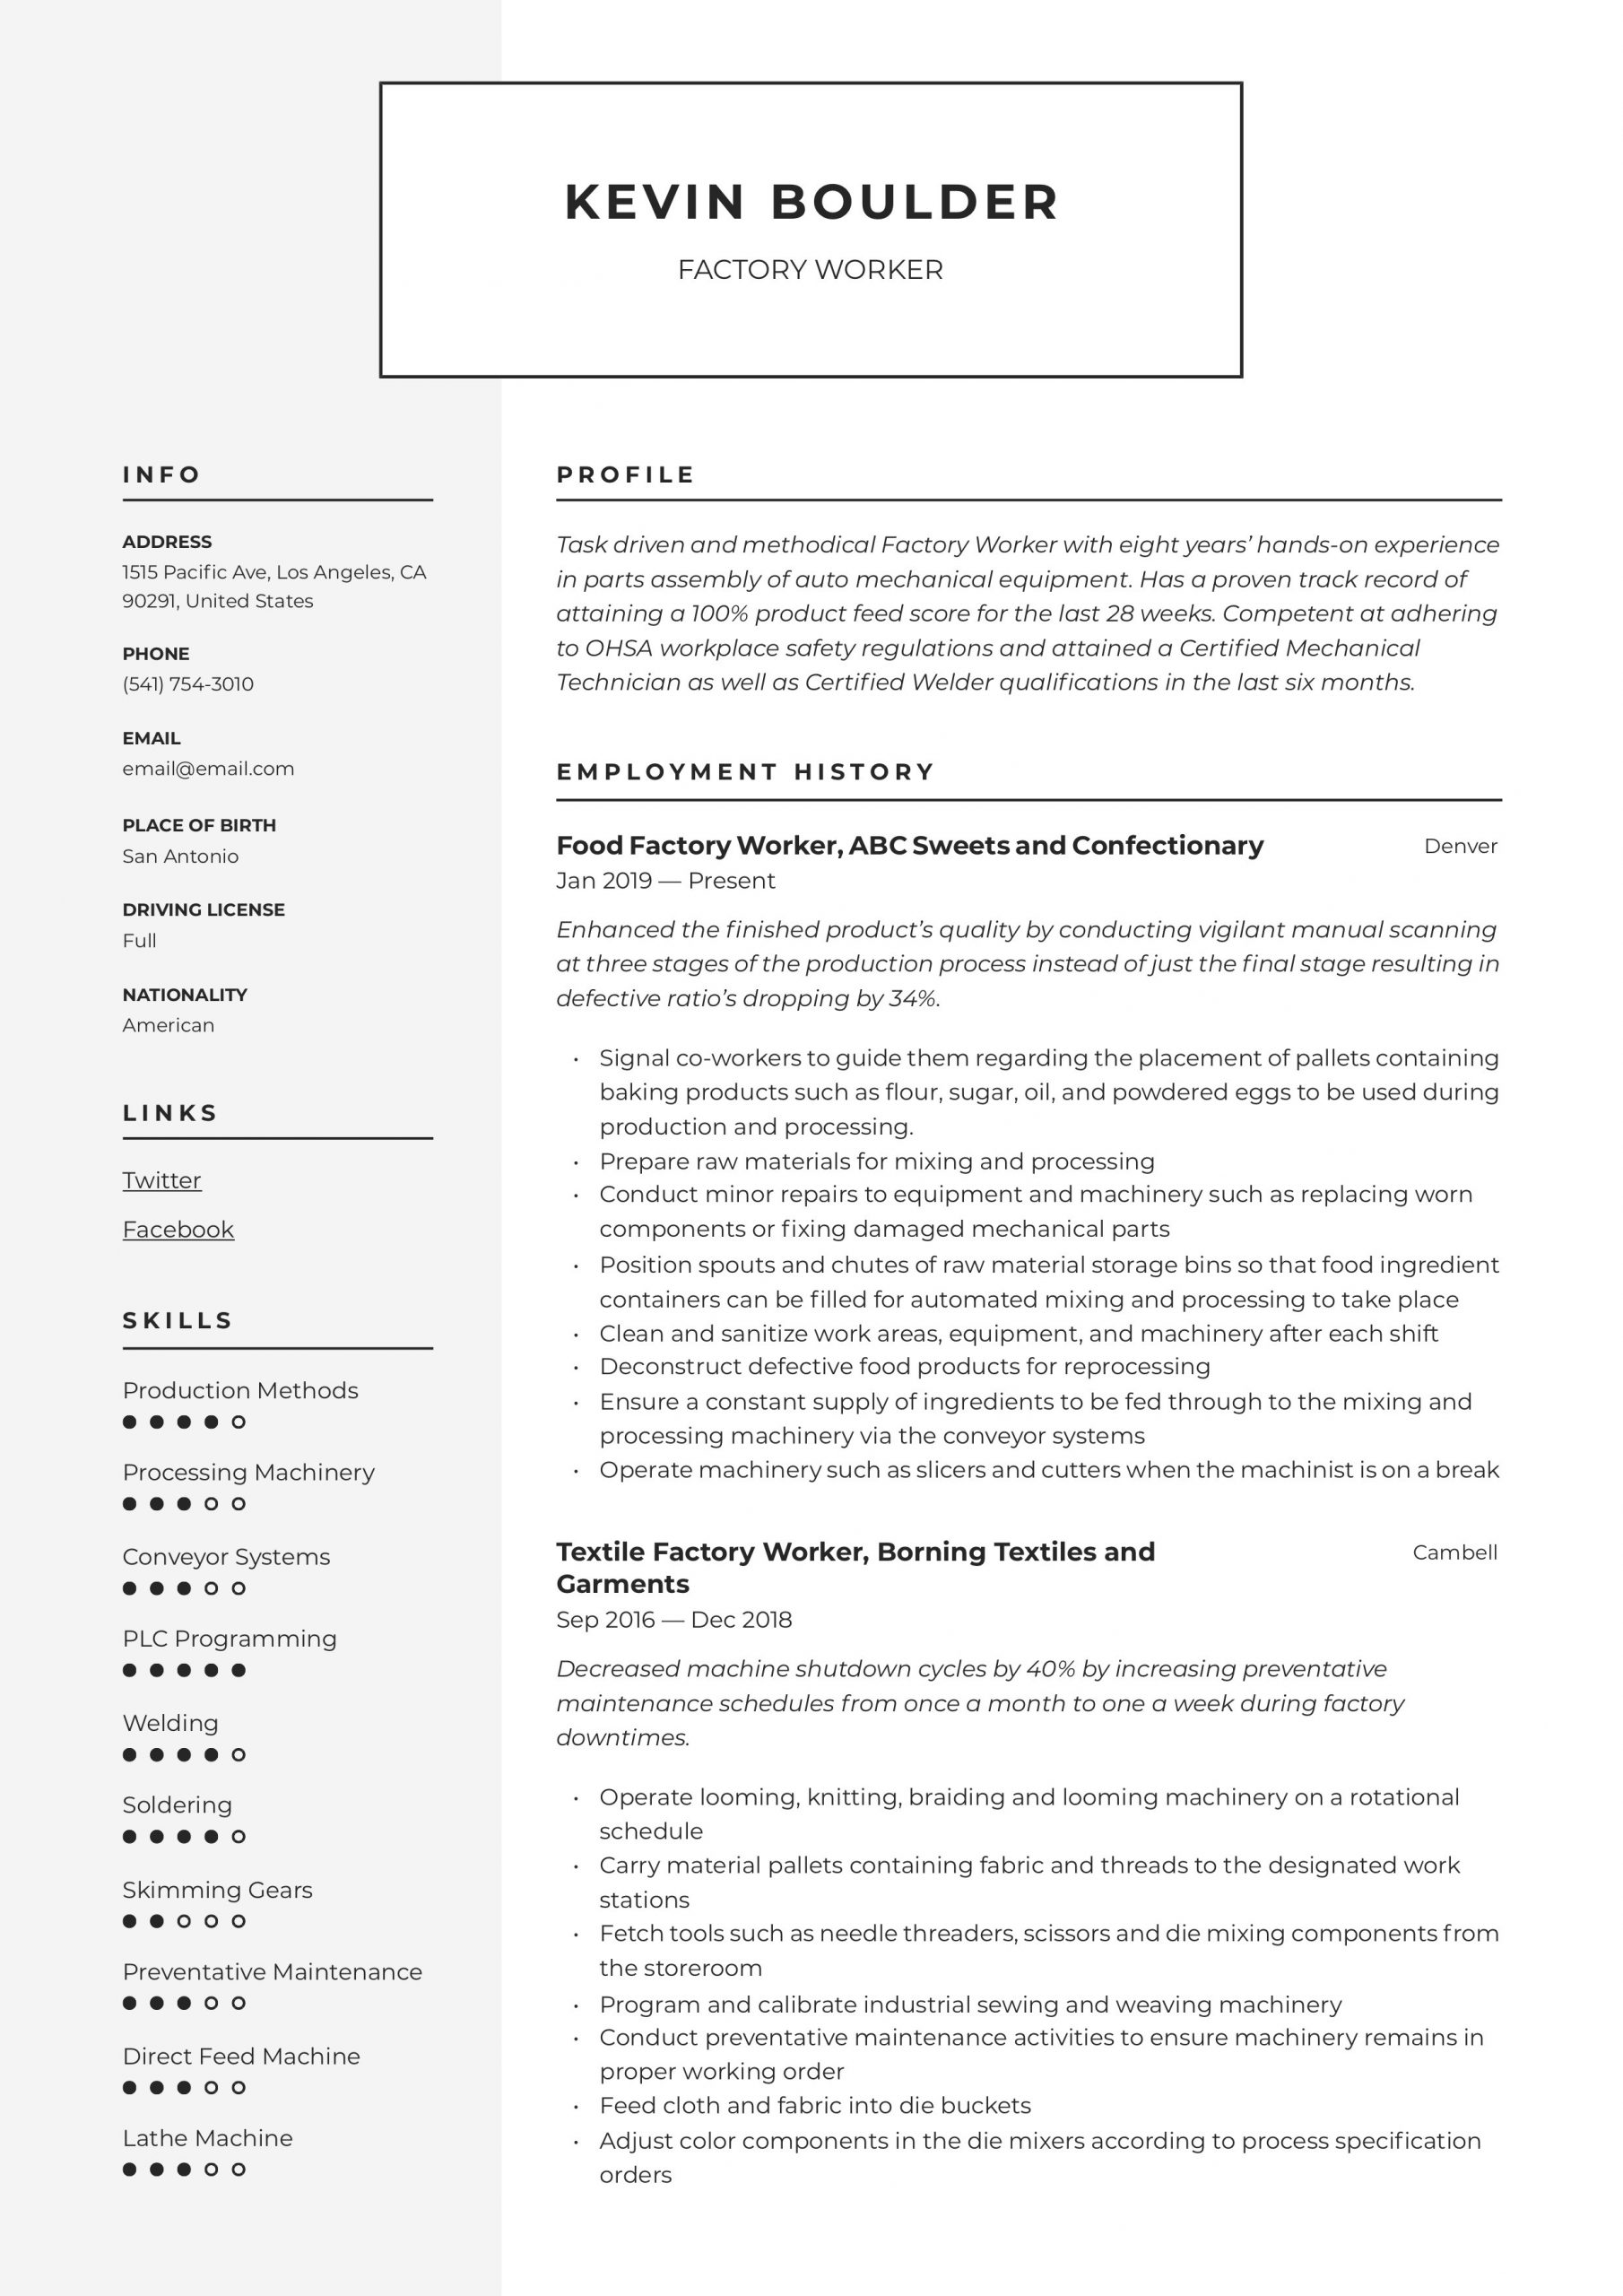 Sample Objective In Resume for Factory Worker Factory Worker Resume & Writing Guide  12 Resume Examples 2020